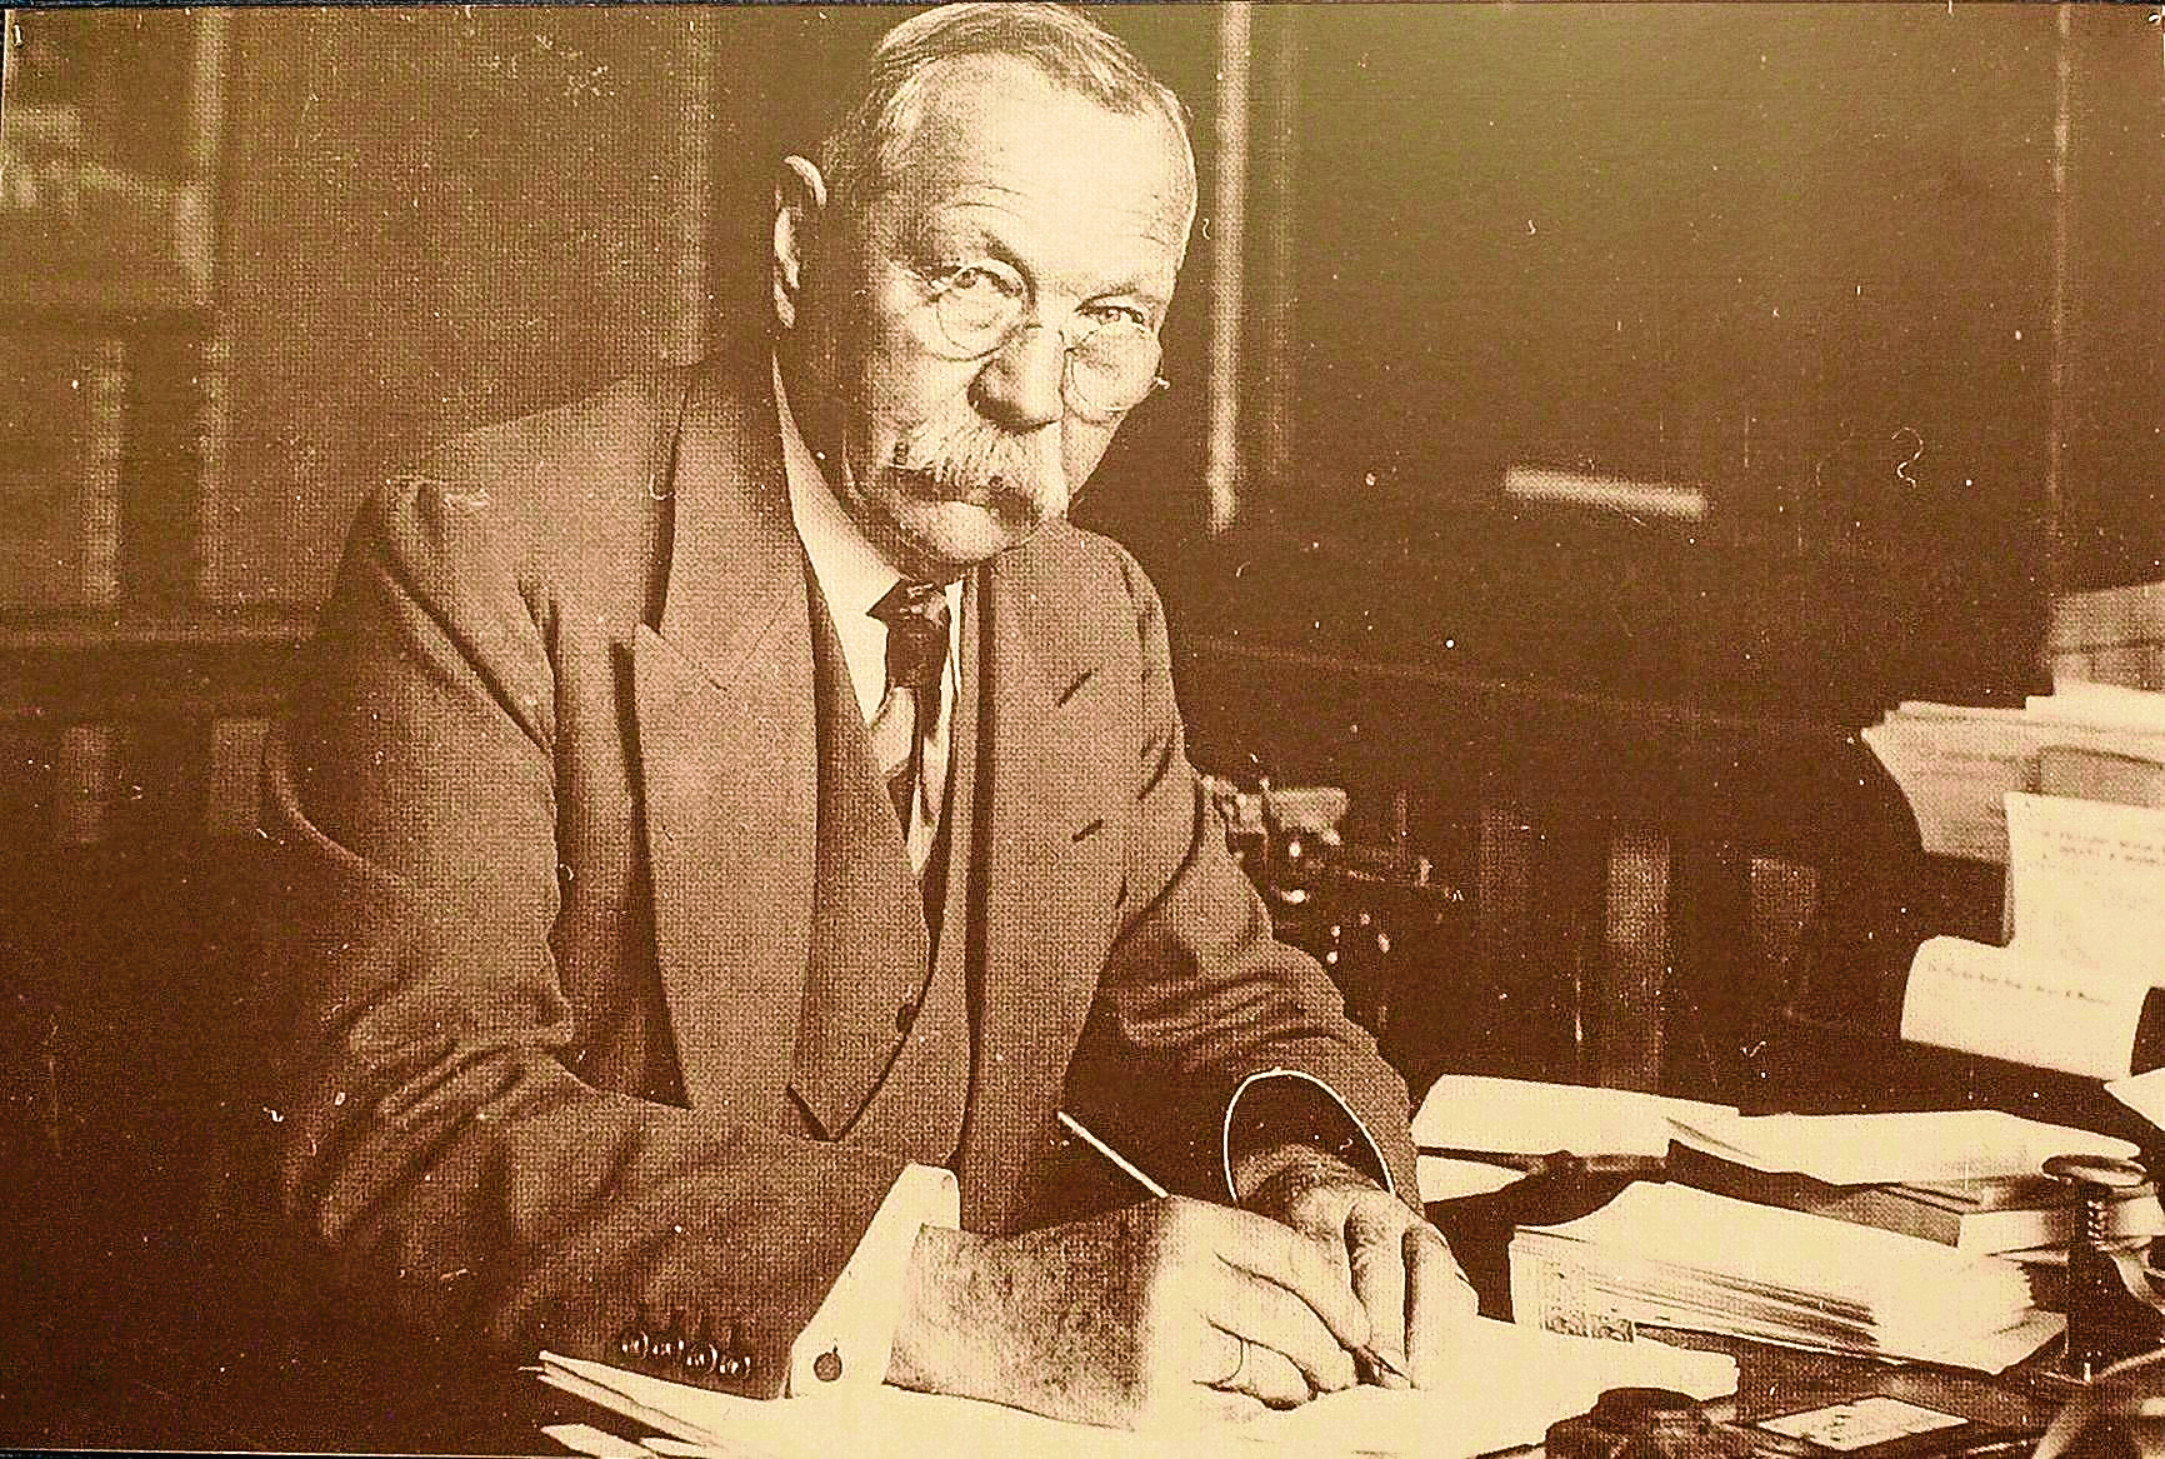 Sir Arthur Conan Doyle taken a few years before his death in 1930 (PA Photo / Kirsty Wigglesworth)